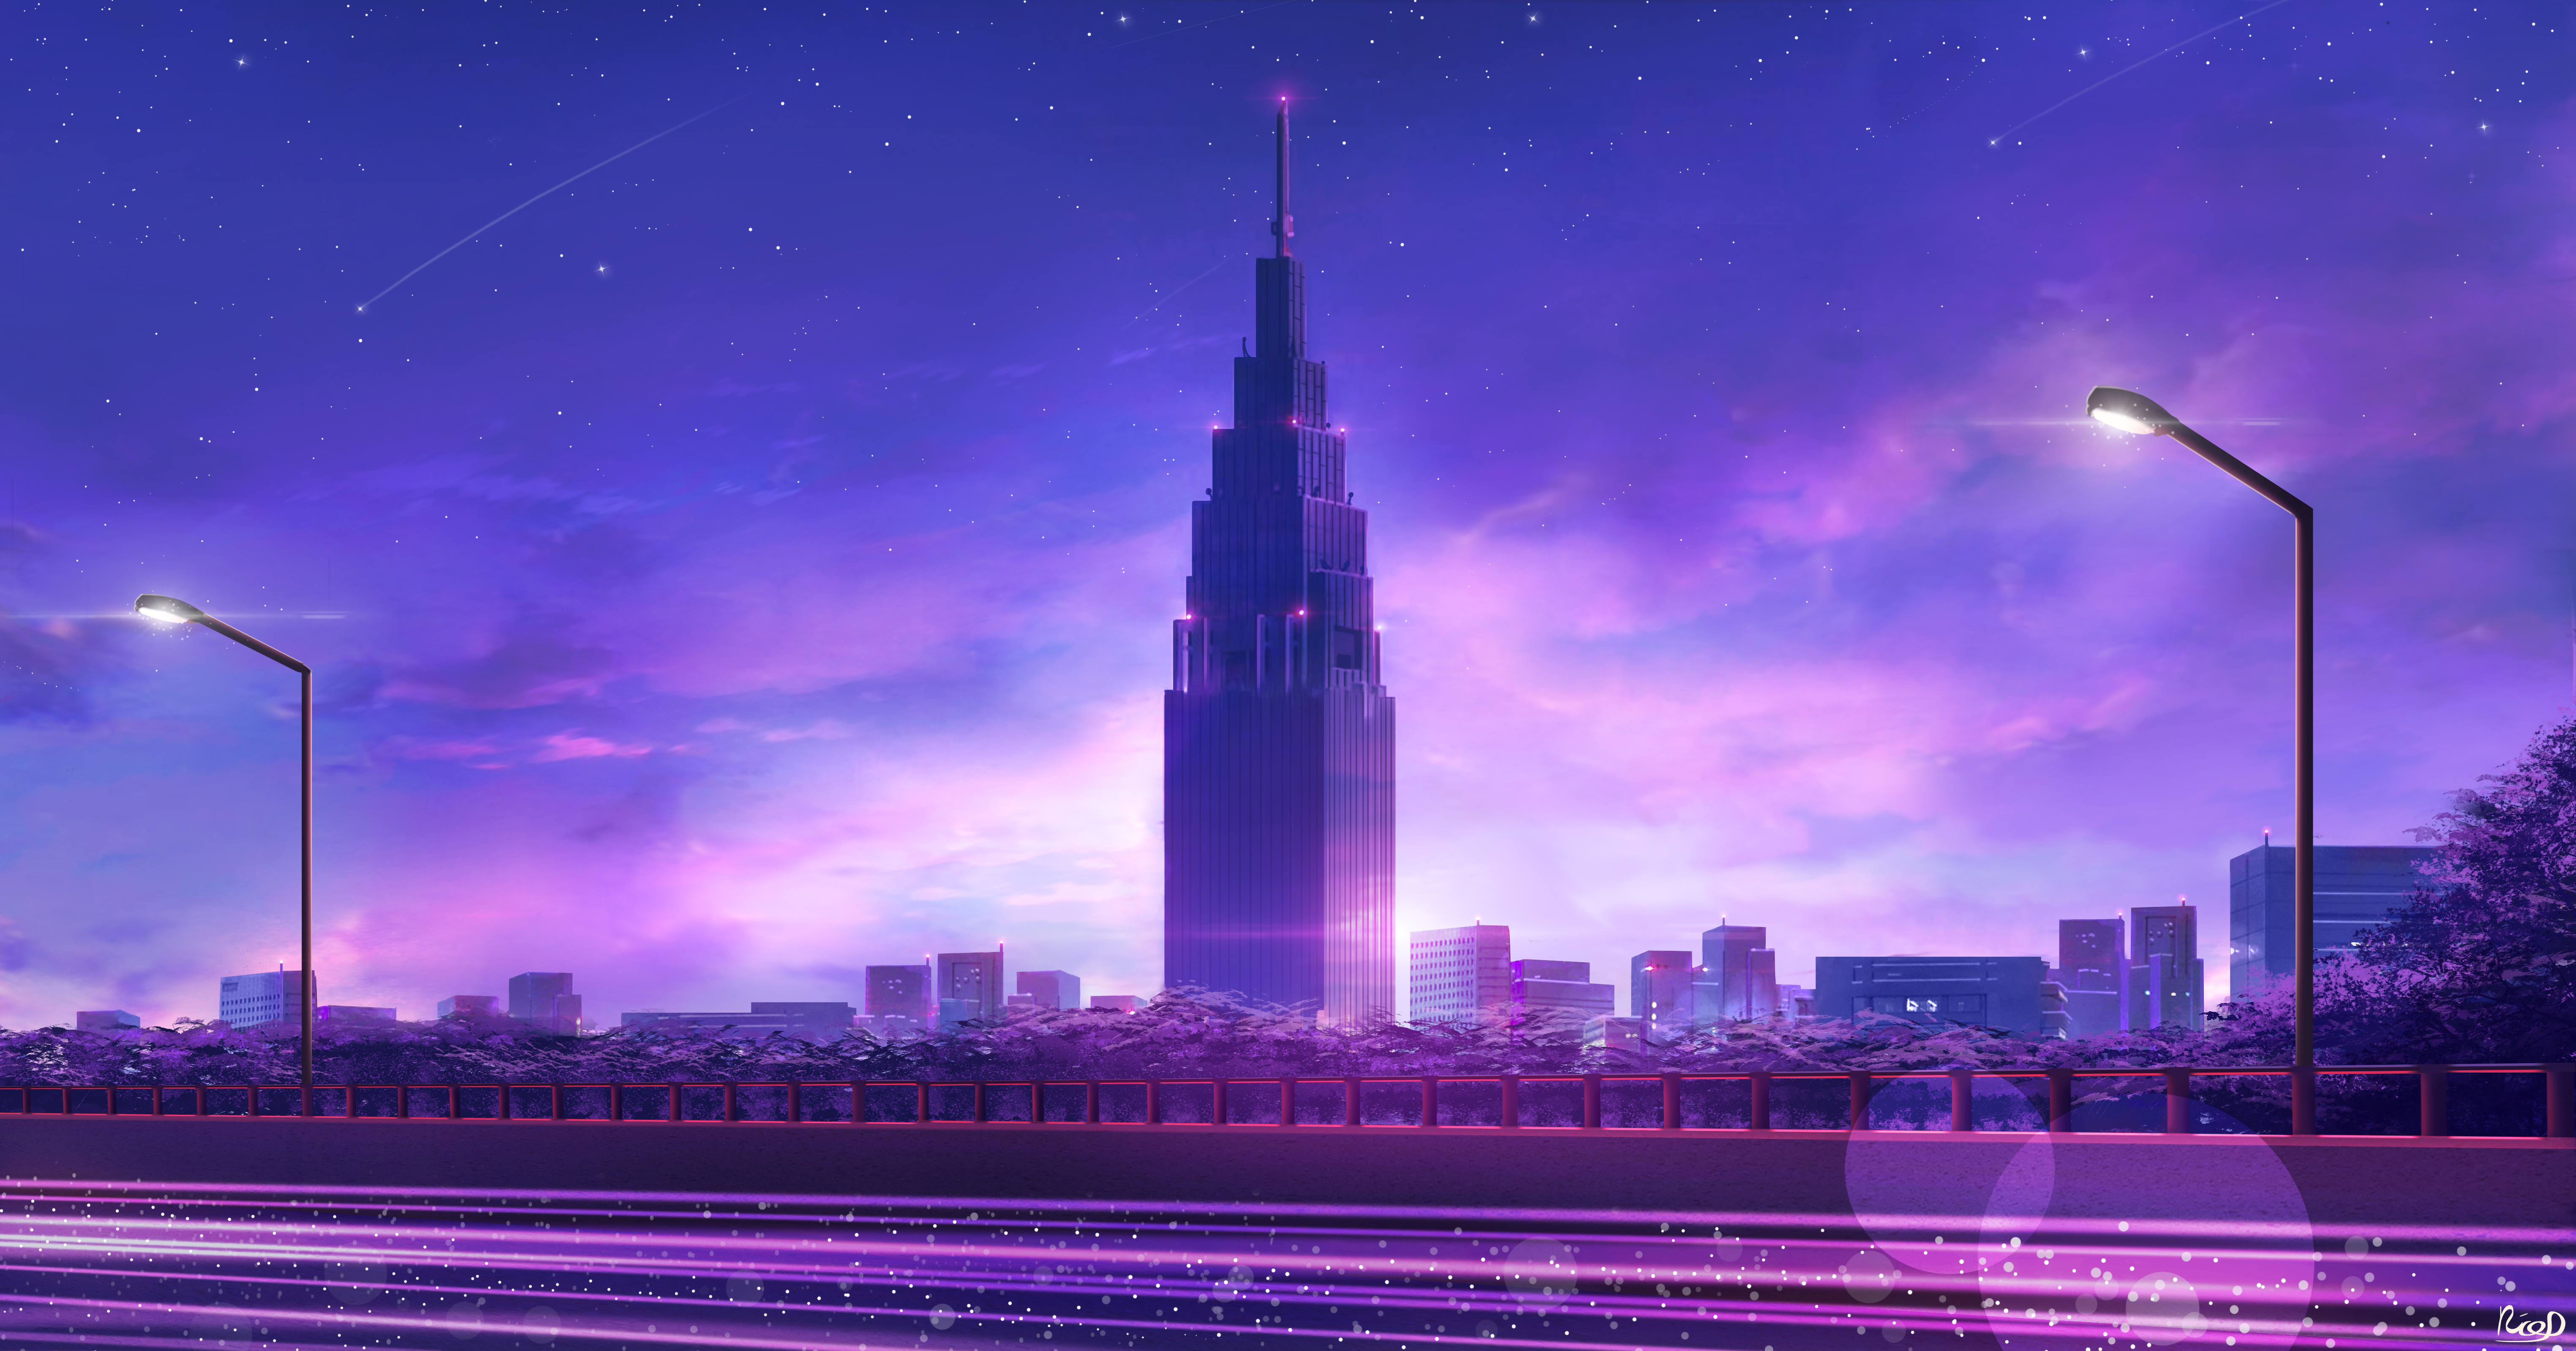 95926 download wallpaper purple, art, architecture, violet, city, skyscraper, tower screensavers and pictures for free